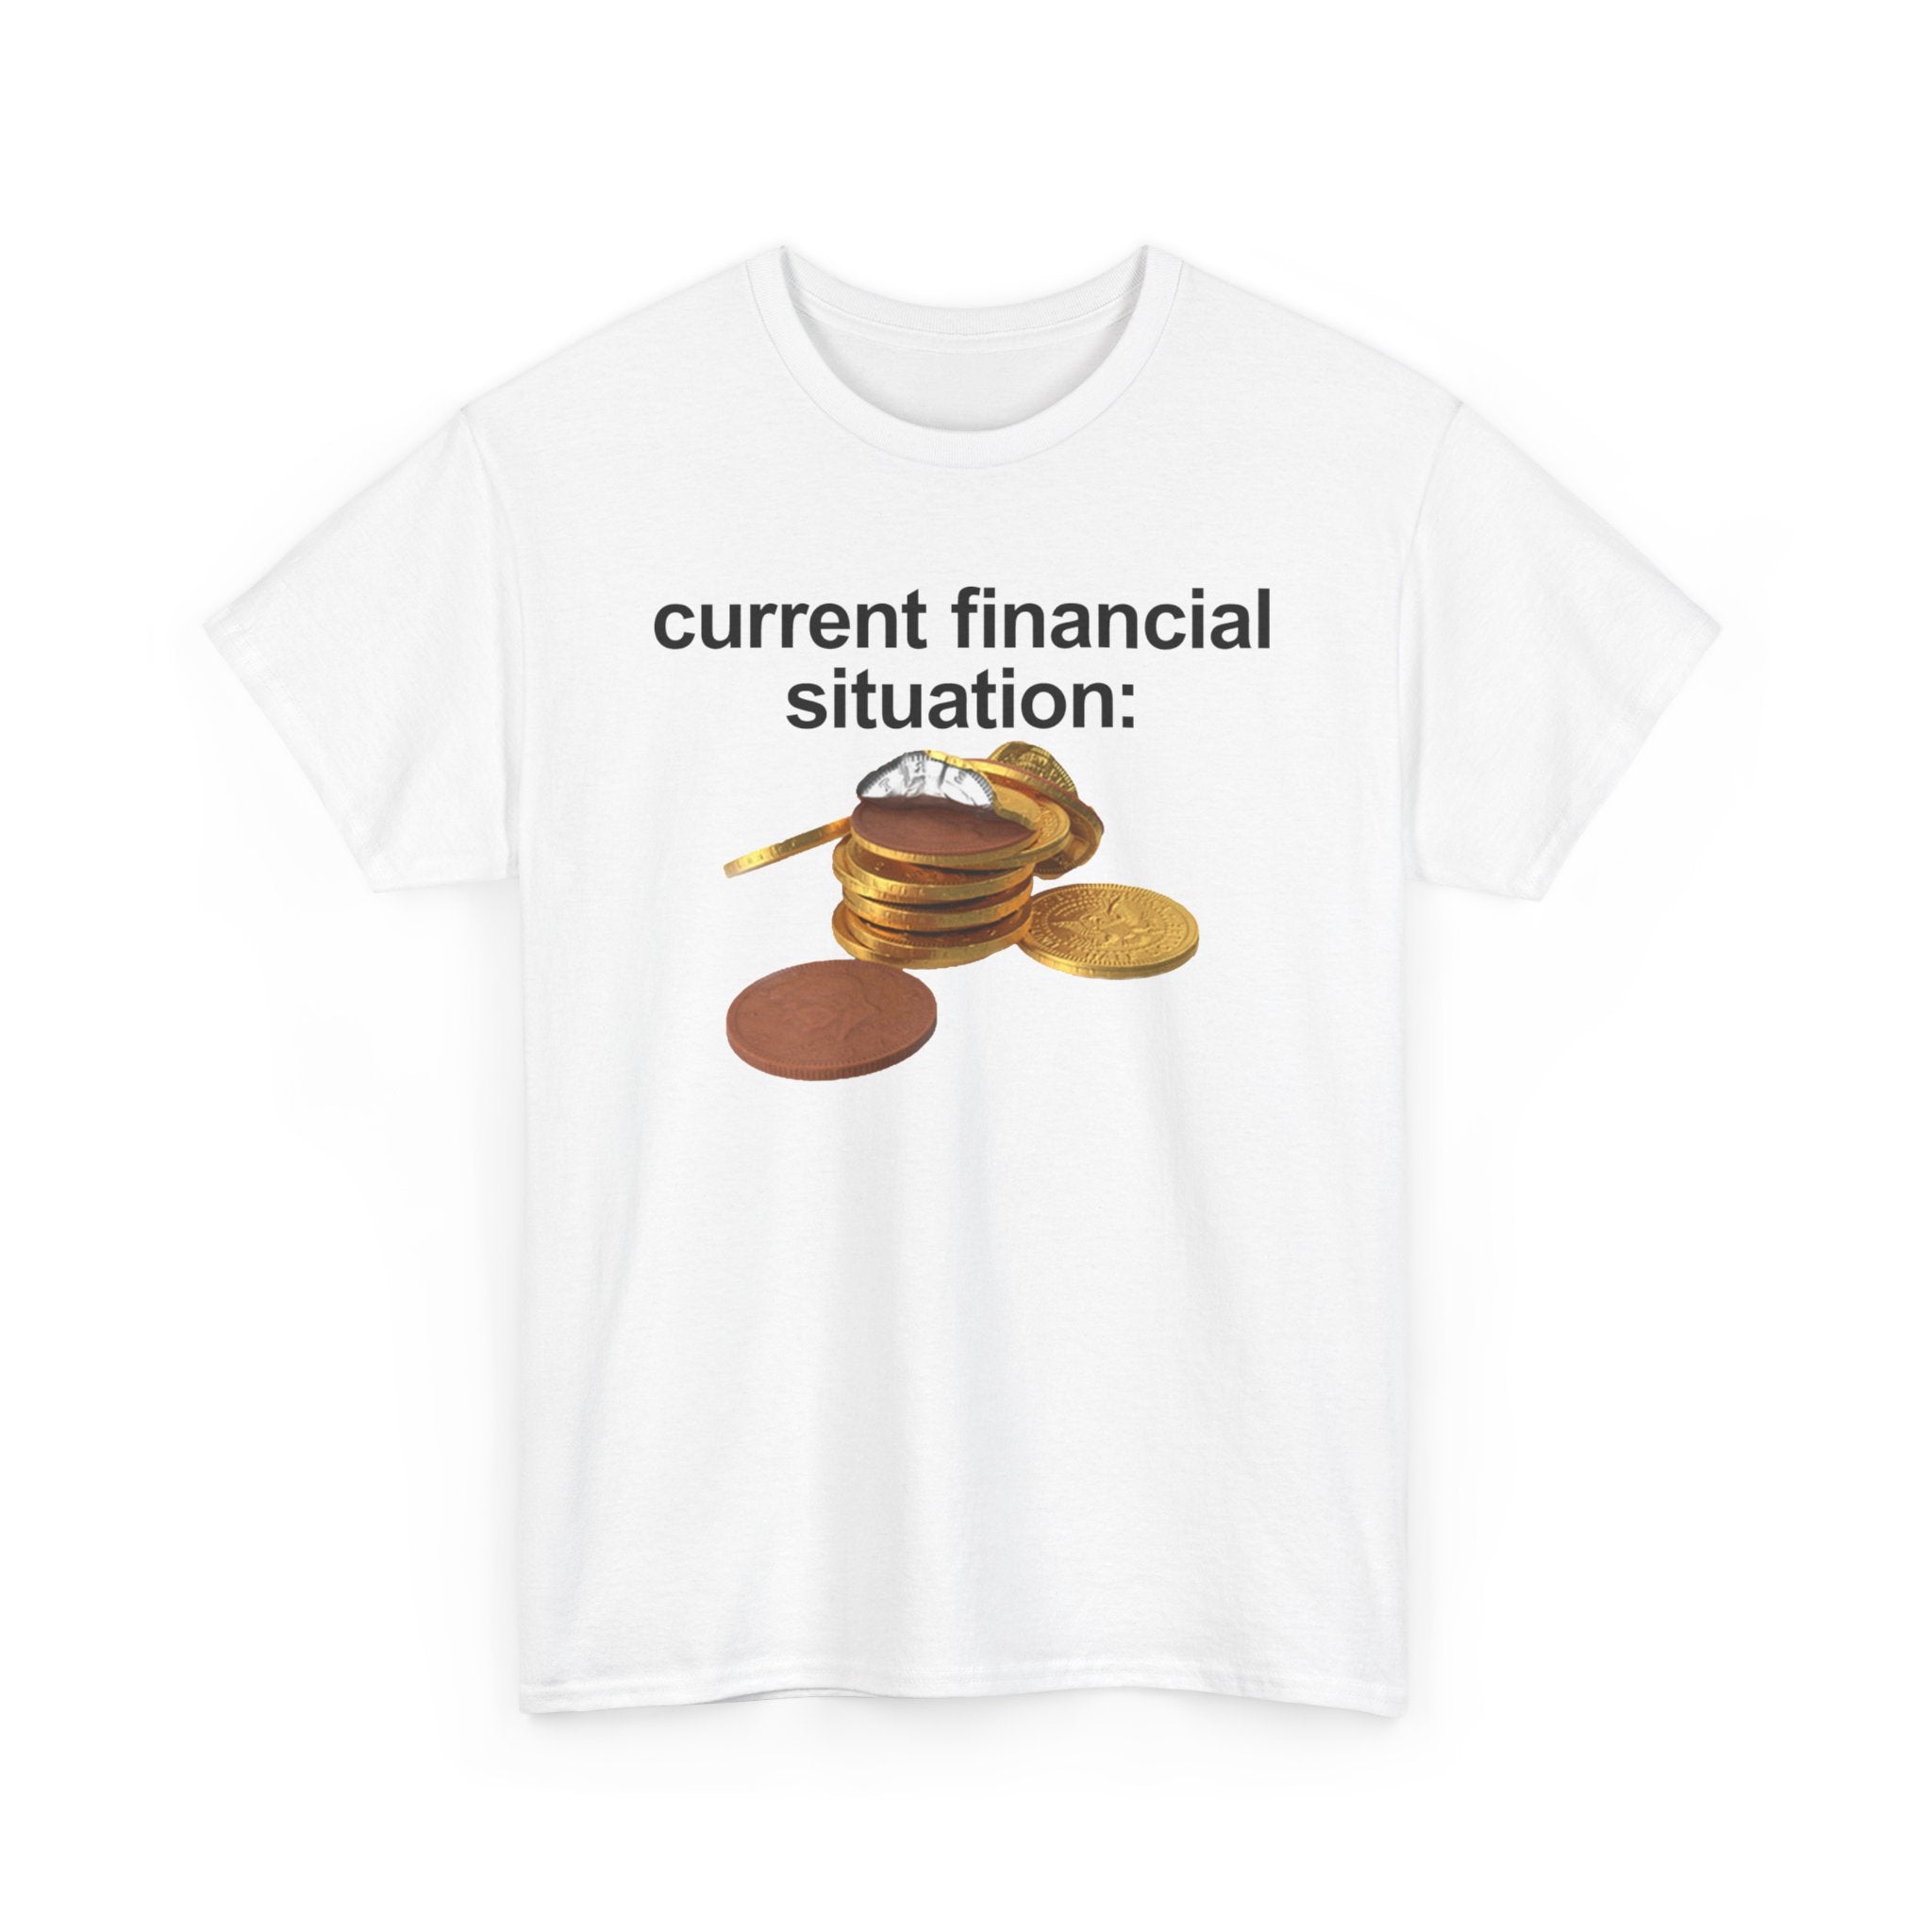 CURRENT FINANCIAL SITUATION T-SHIRT